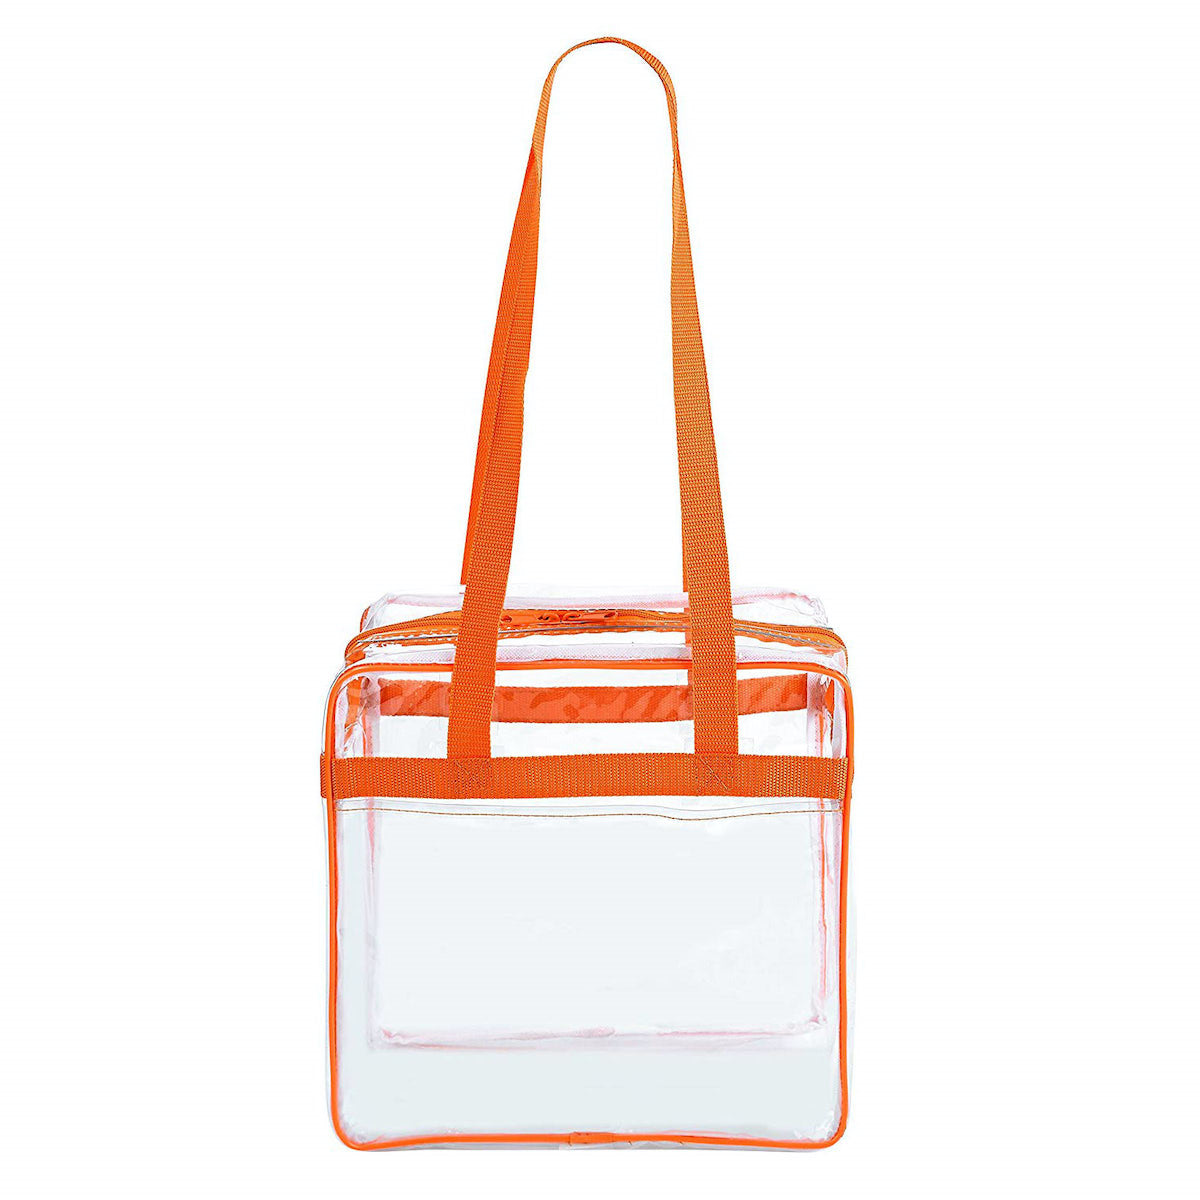 Yorssley Clear Lunch Bags for Work - Stadium Approved Transparent Tote Bag,  Crossbody, Purse - Heavy Duty Extra Large 12x12x6